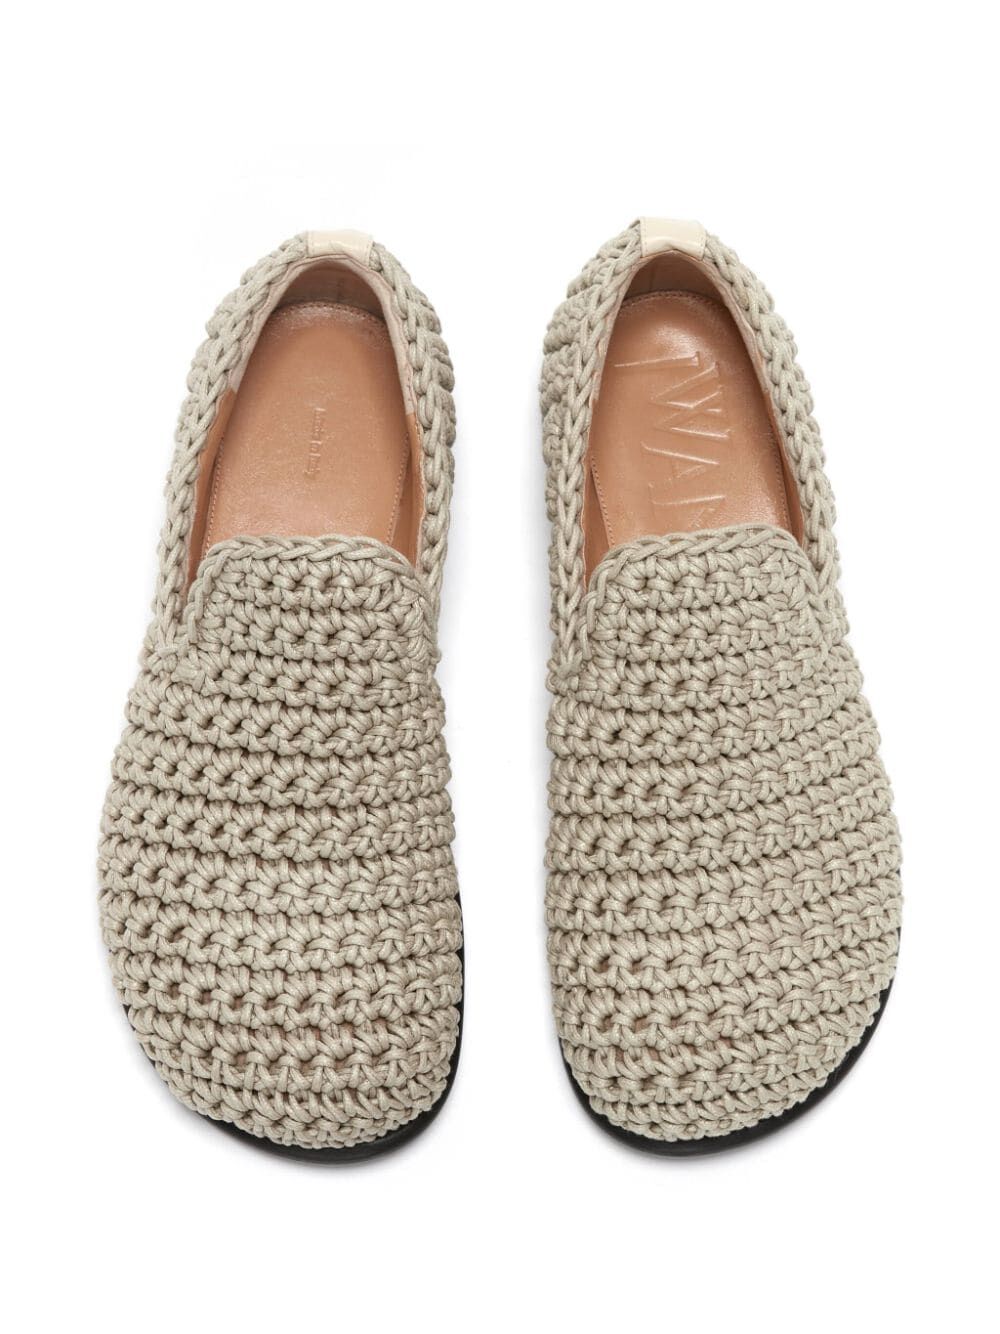 JW ANDERSON-LOAFER CROCHET-ANW42223A 19546